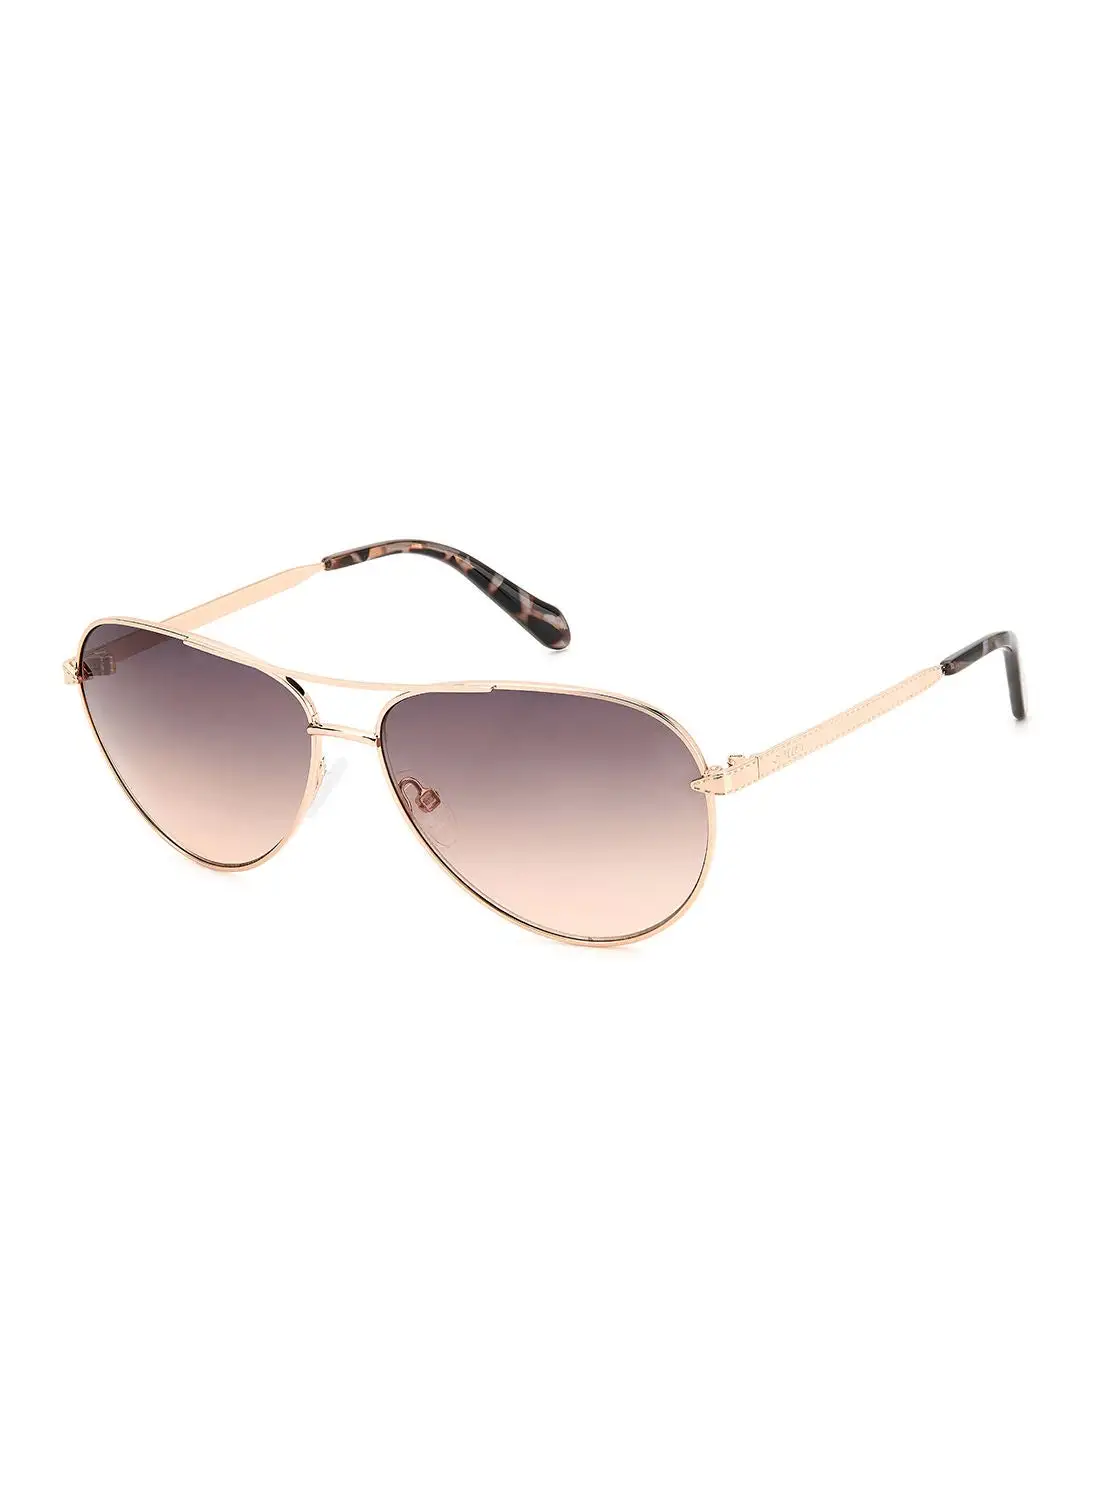 FOSSIL Women's UV Protection Pilot Sunglasses - Fos 3141/G/S Red Gold 59 - Lens Size: 59 Mm